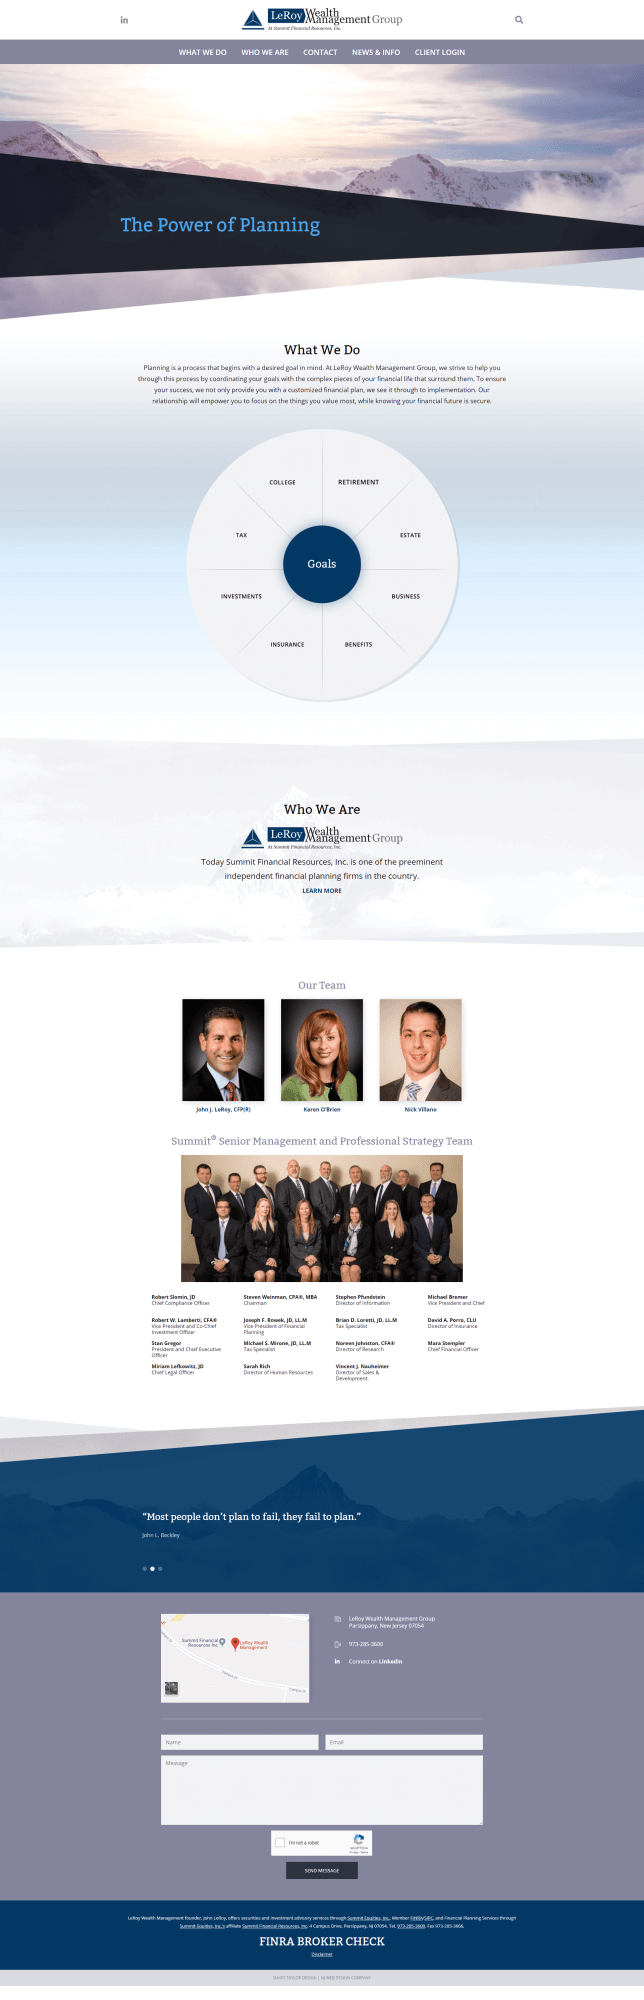 LeRoy Wealth Management – Homepage